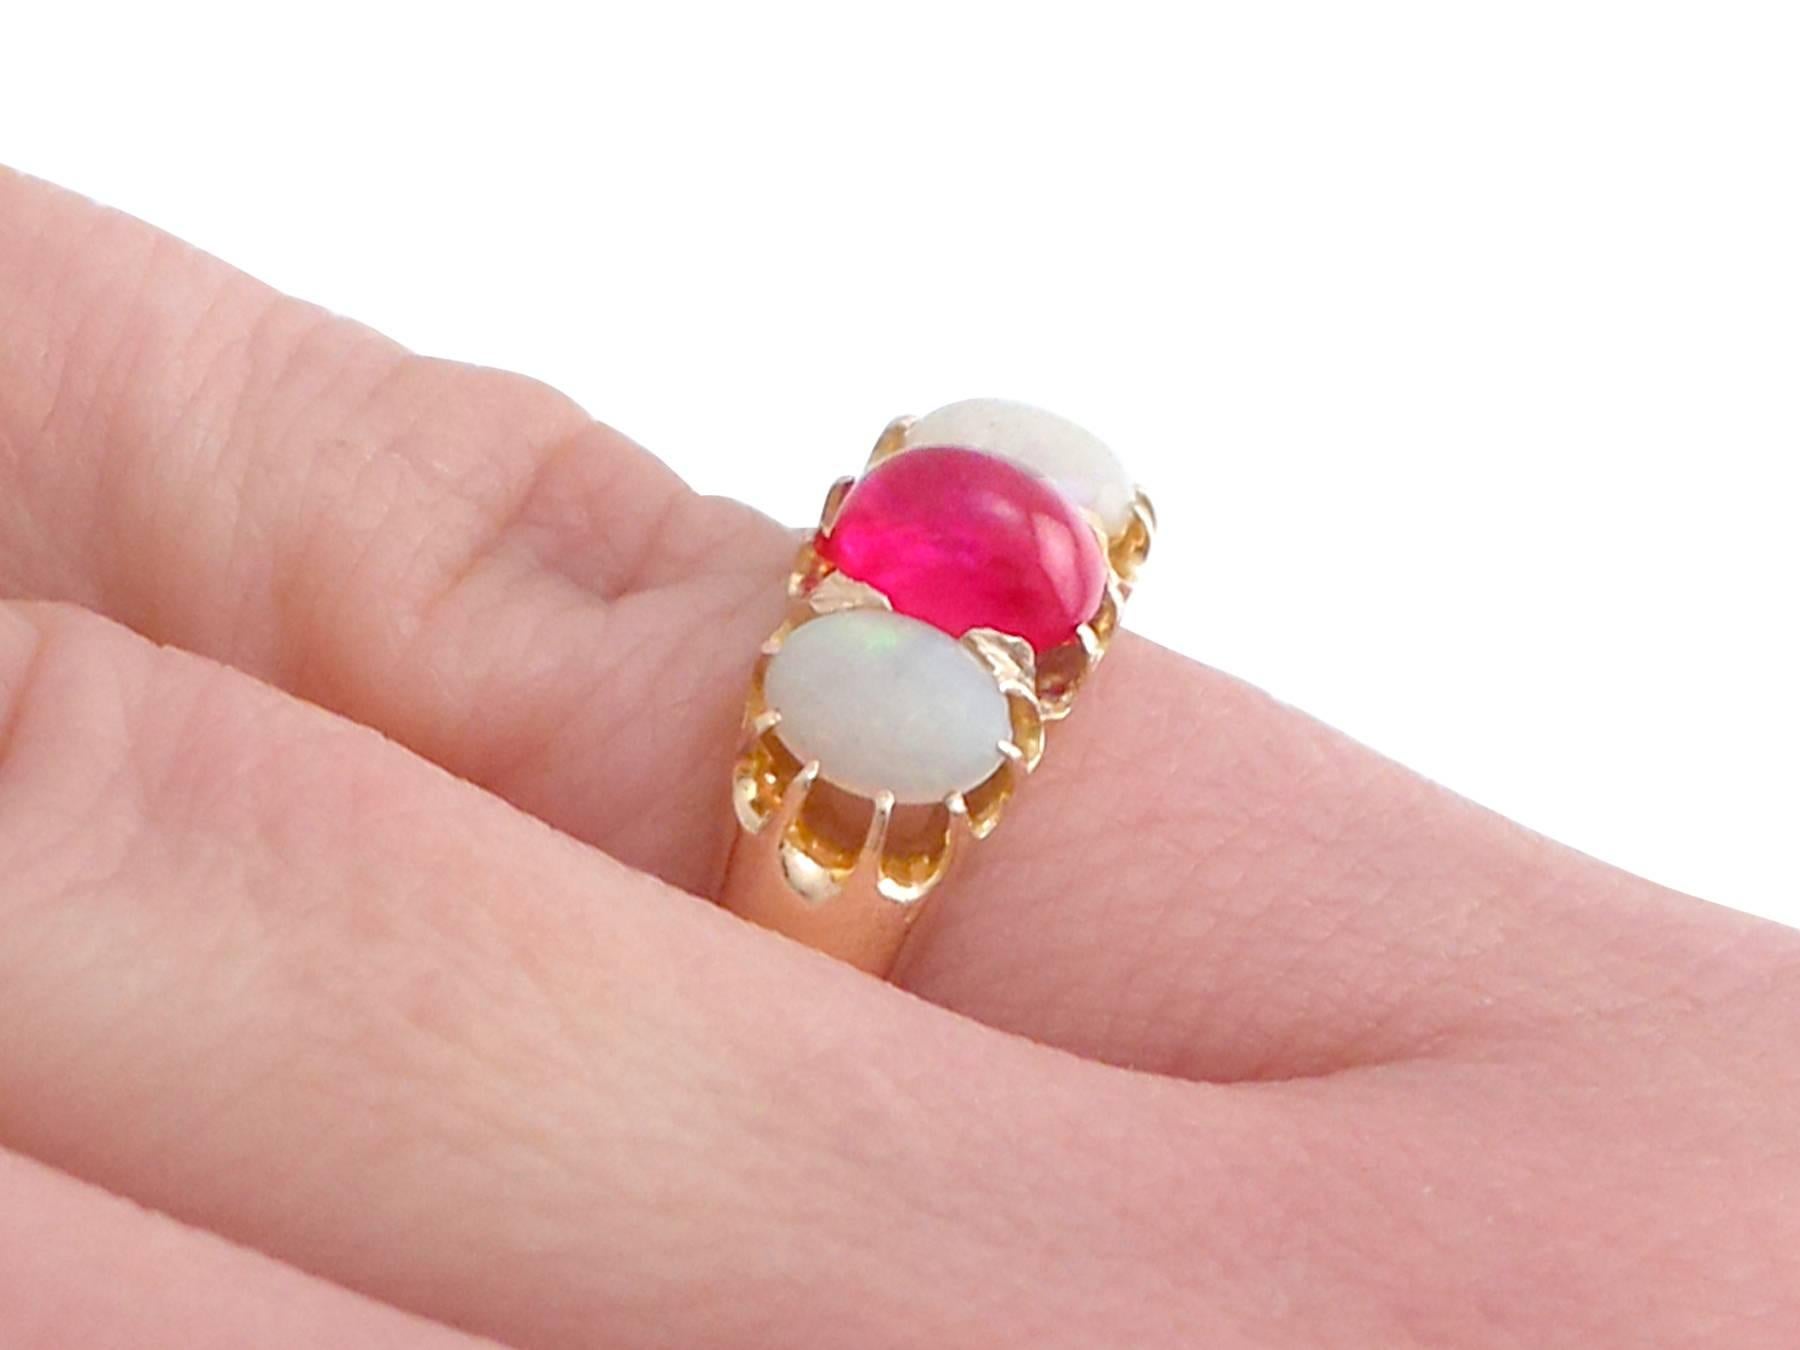 Antique 1890s Cabochon Cut Ruby and Opal Yellow Gold Trilogy Ring In Excellent Condition For Sale In Jesmond, Newcastle Upon Tyne